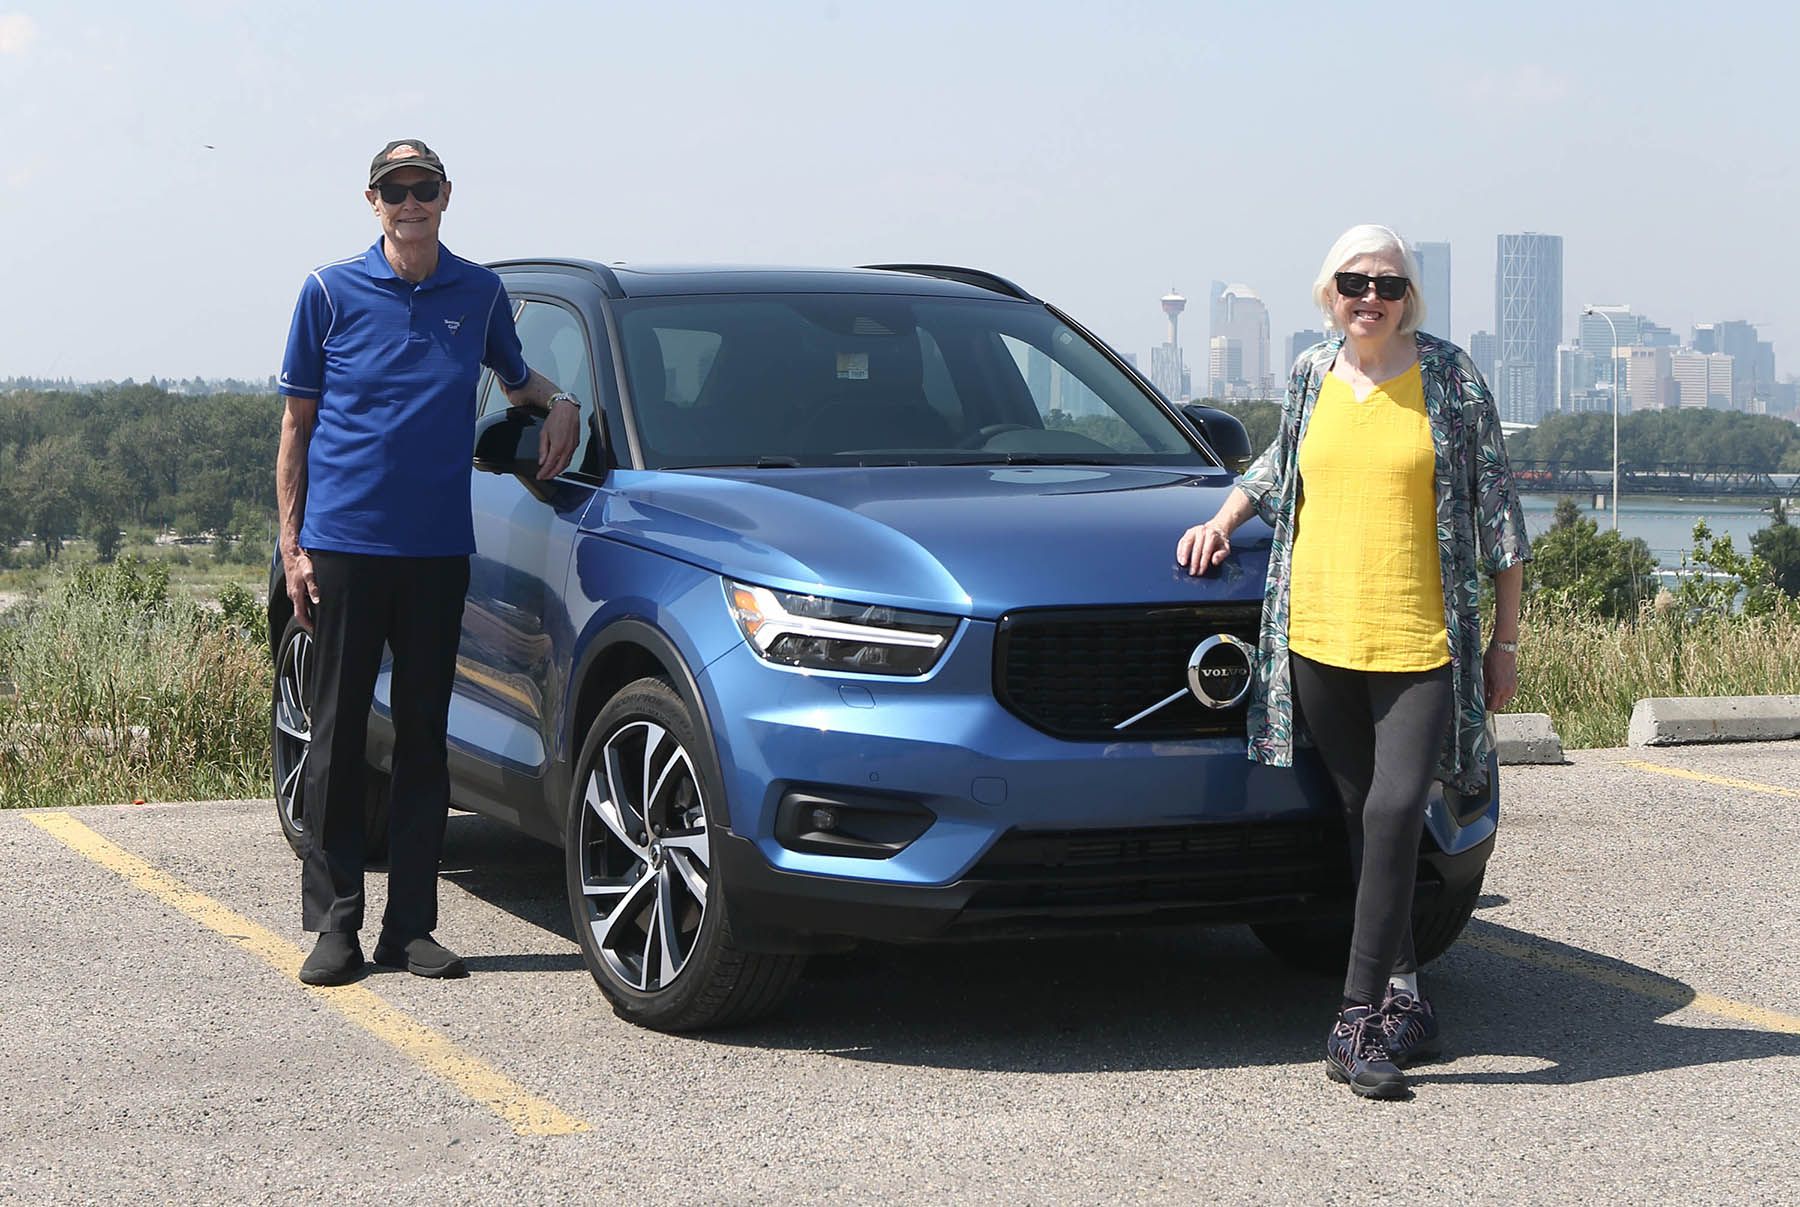 My Volvo XC40 ownership review: Ride, handling, mileage & other updates